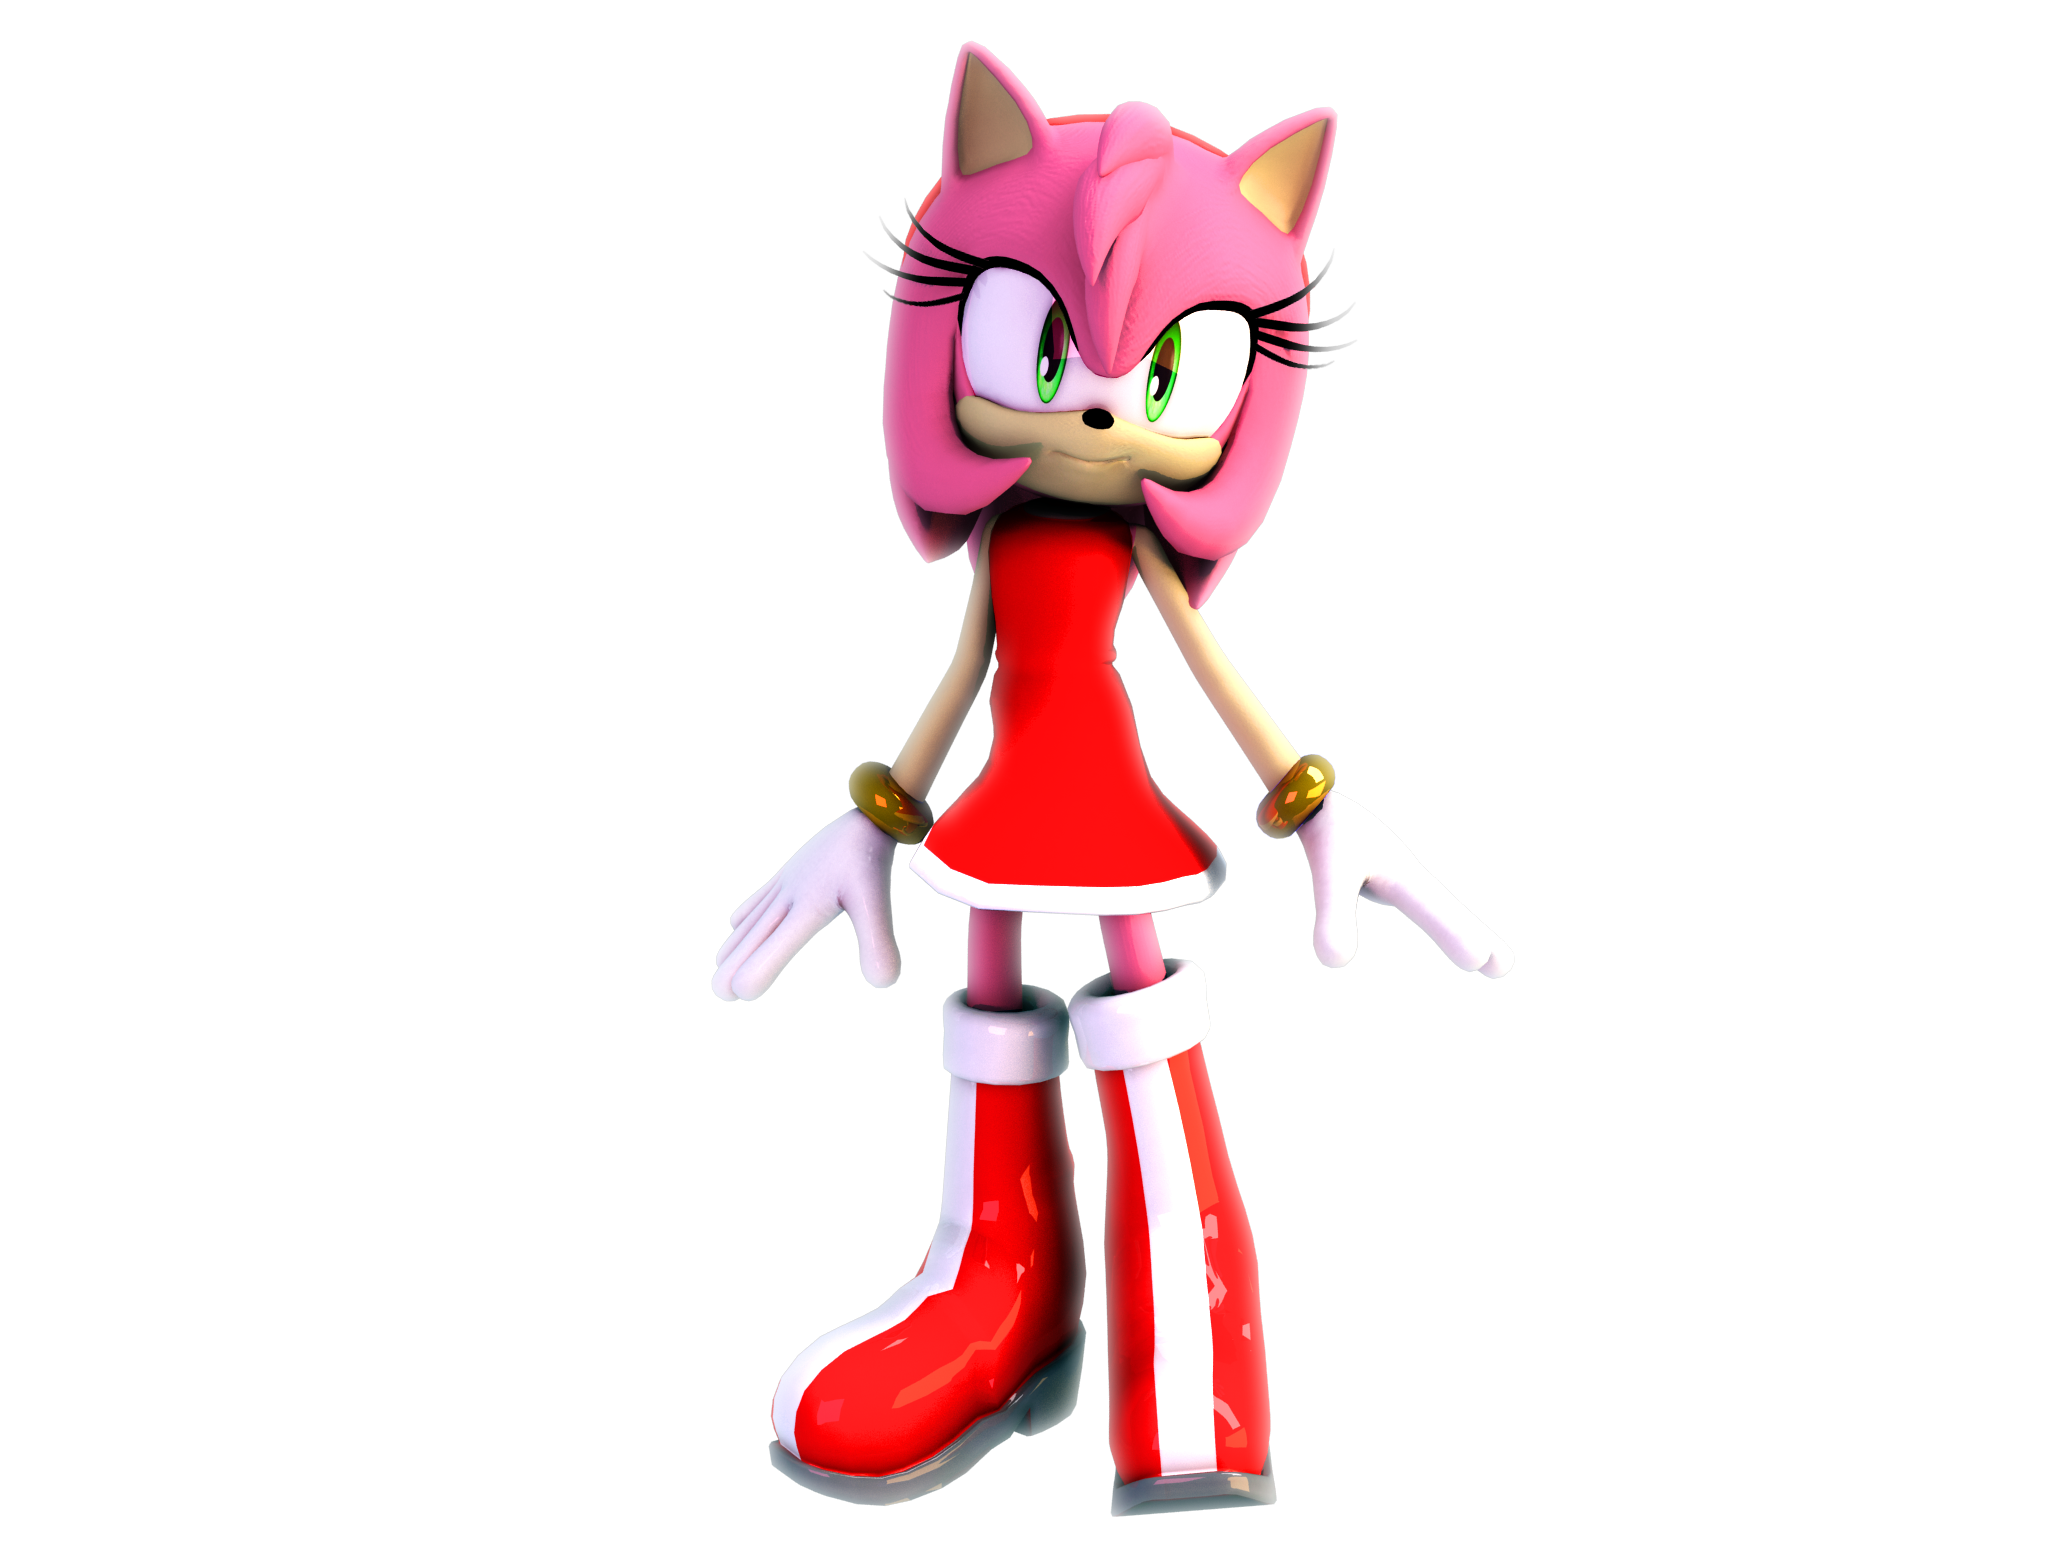 amy_in_25_years__by_jackydik-d63tsii.png